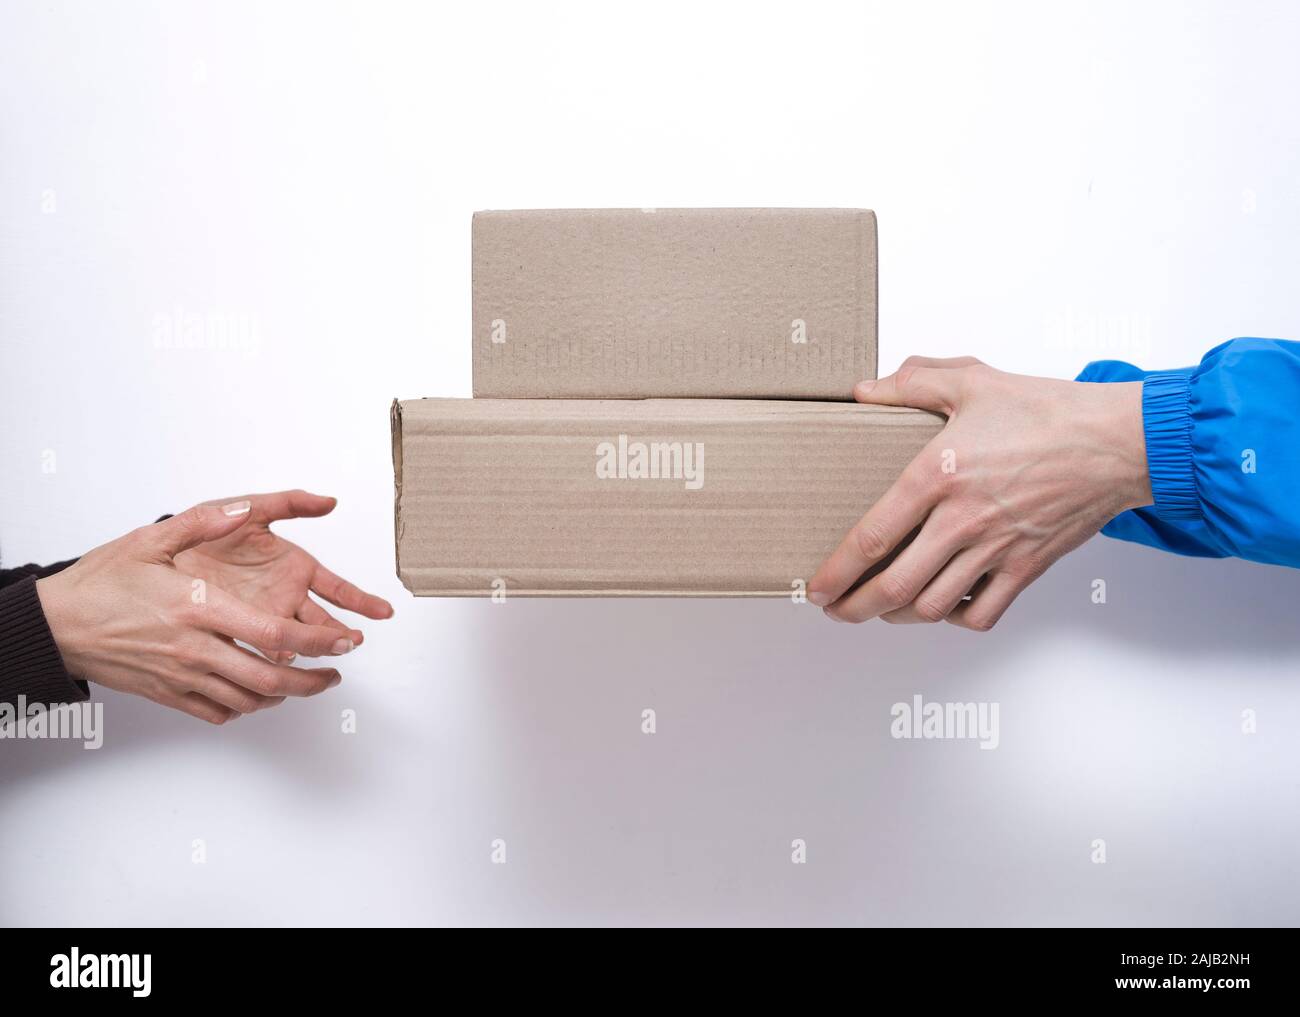 The courier gives delivery boxes to the customer. Stock Photo